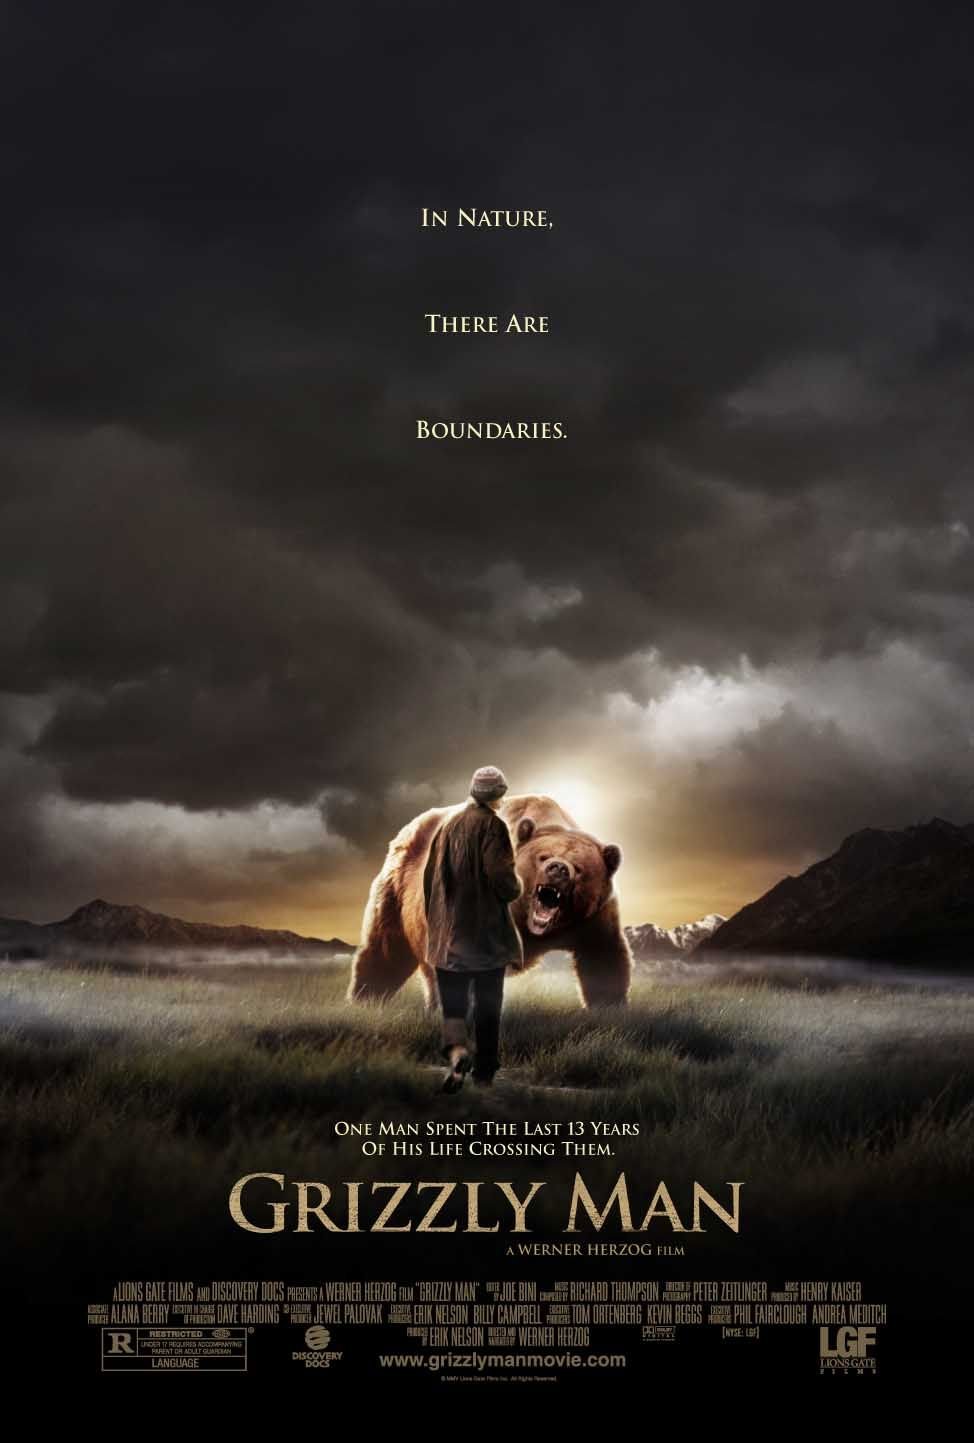 Grizzly Man Google image from http://www.impawards.com/2005/posters/grizzly_man_ver2_xlg.jpg